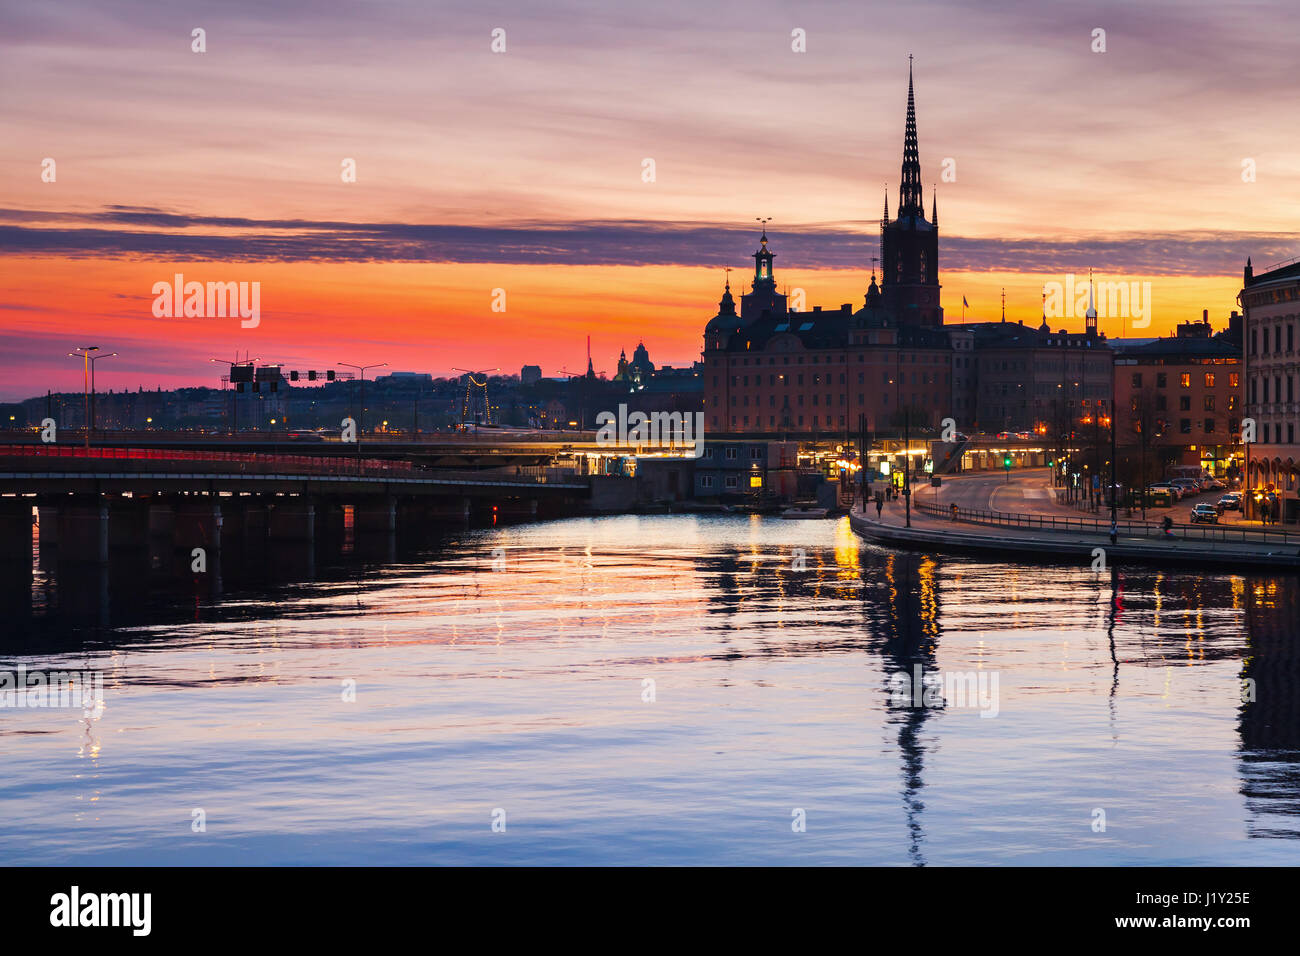 Silhouette cityscape of Gamla Stan city district, central Stockholm ...